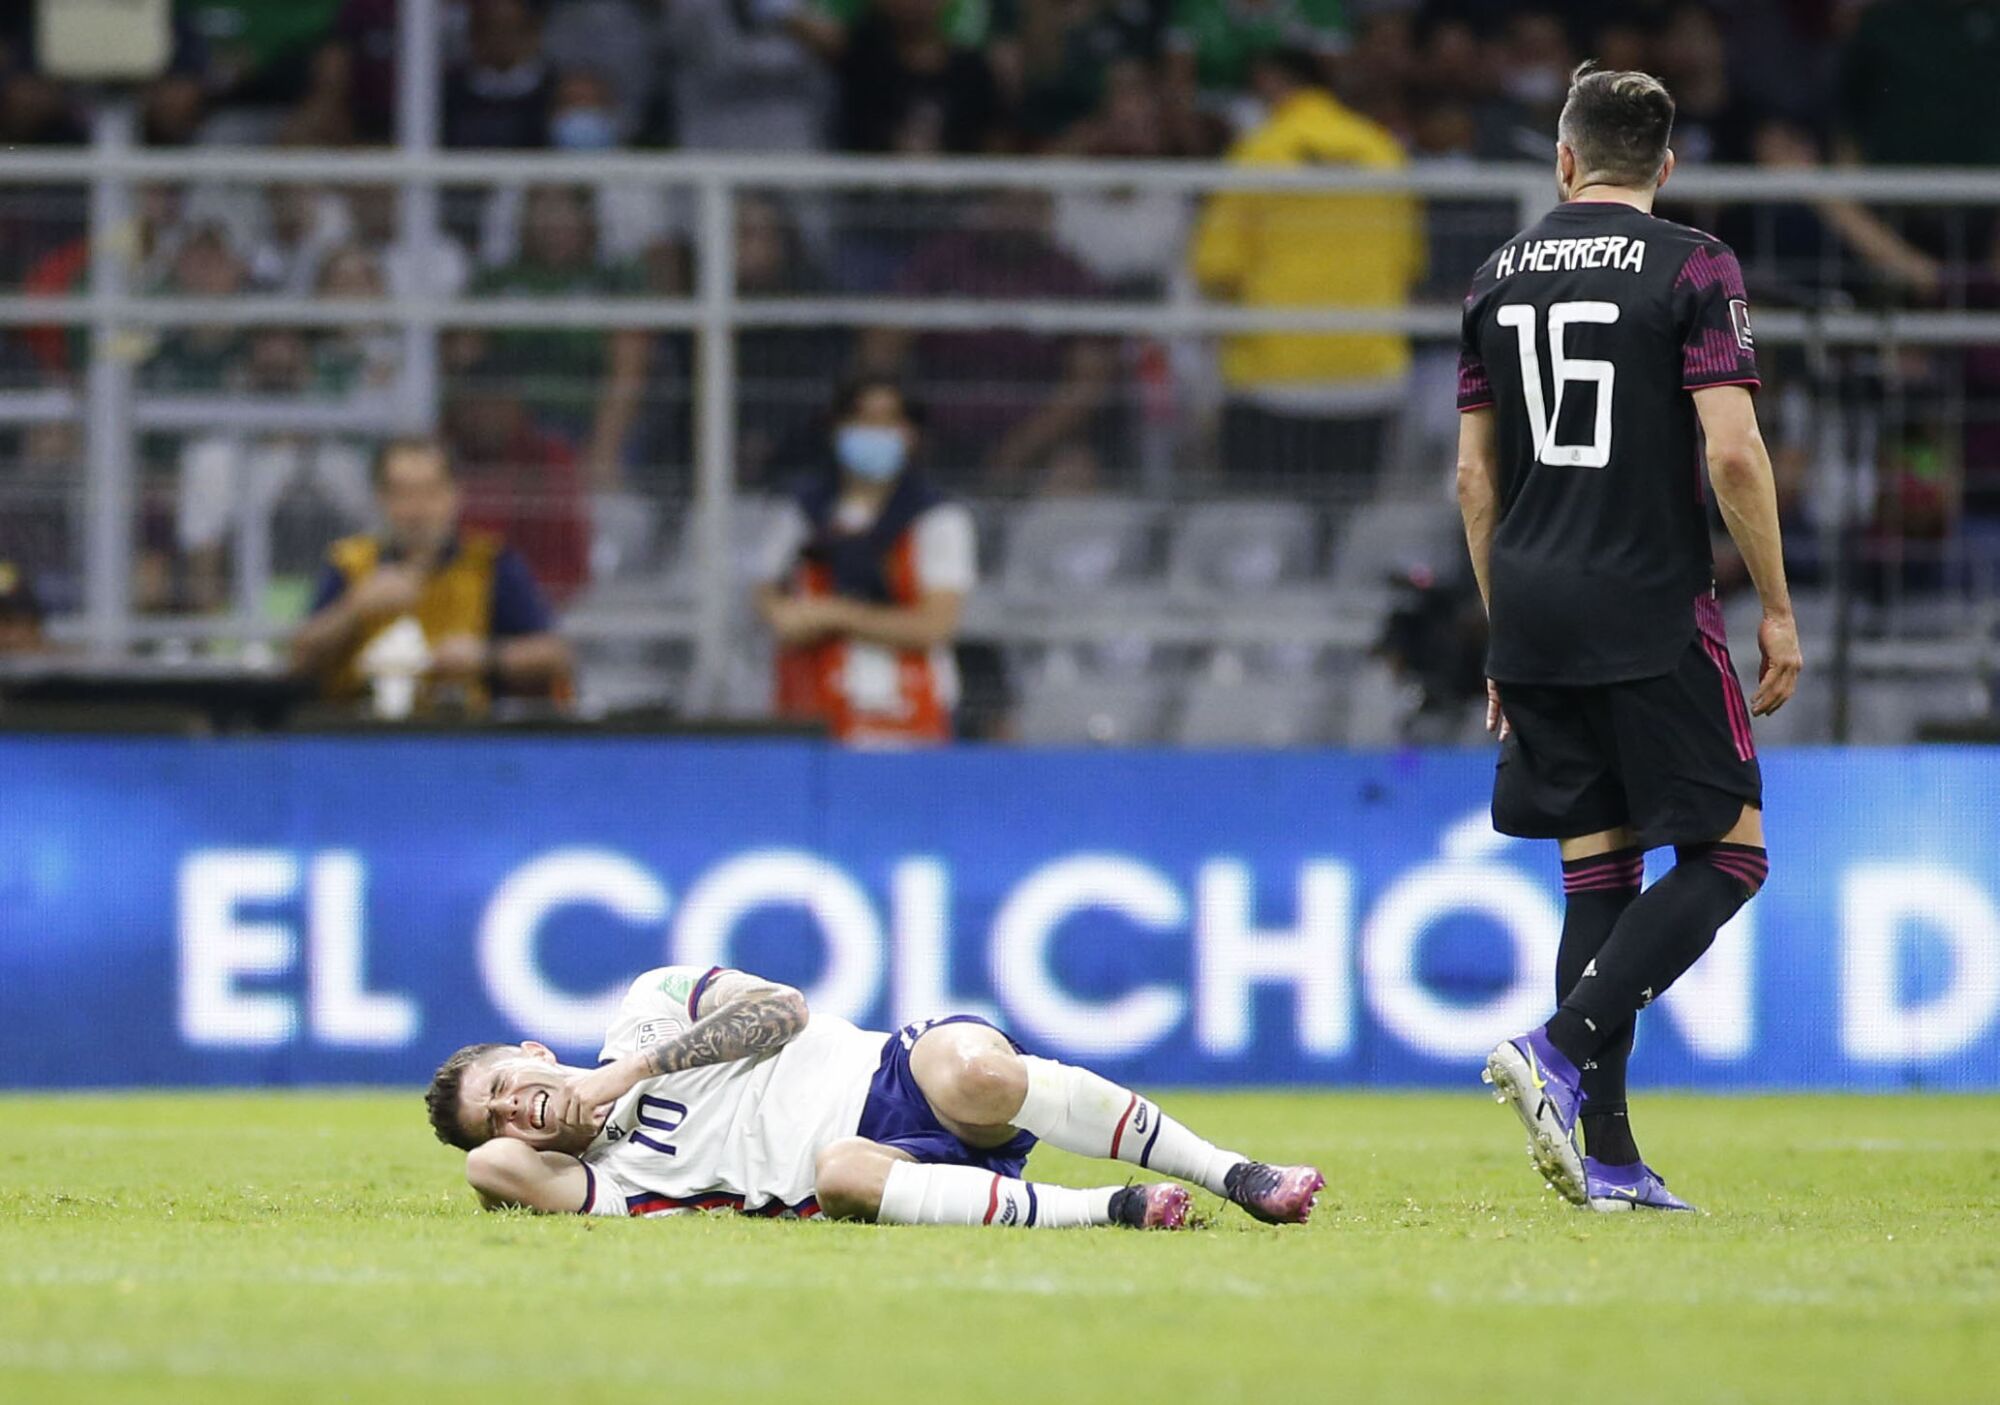 U.S. forward Christian Pulisic grimaces after being taken down as Mexico defender Hector Moreno walks next to him.